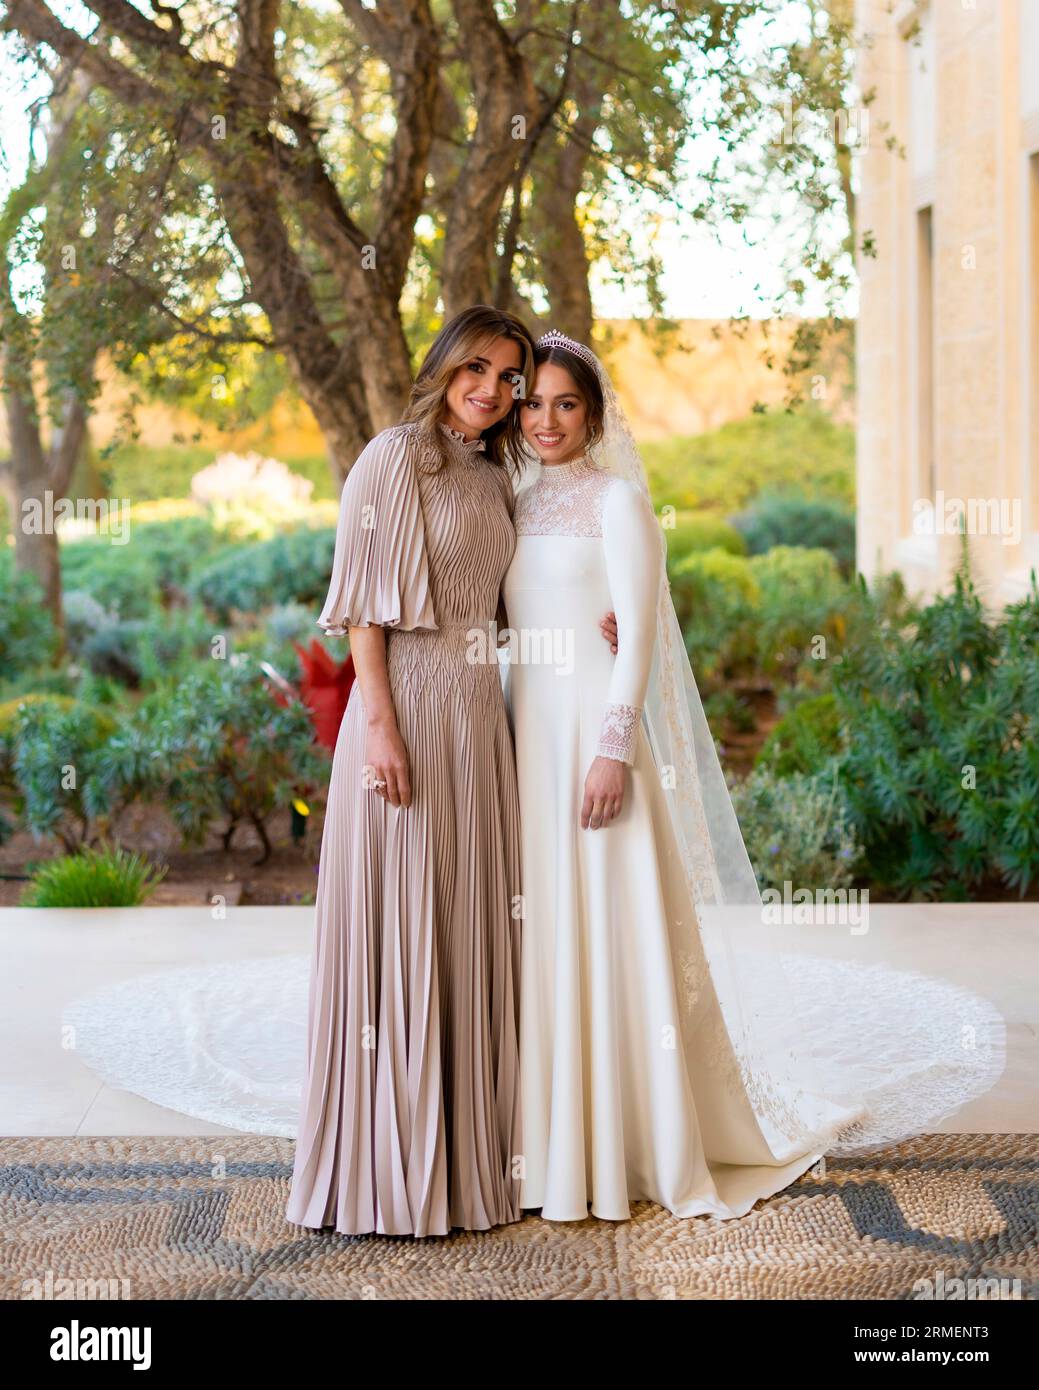 Queen Rania attends wedding of Her Royal Highness Princess Iman bint Abdullah II and Mr. Jameel Alexander Thermiotis, on March 12, 2023, pictures on the occasion of Queen Rania Al Abdullah celebrating her birthday on Thursday, August 31, 2023 Photo: Royal Hashemite Court / Albert Nieboer / Netherlands OUT / Point De Vue OUT Stock Photo